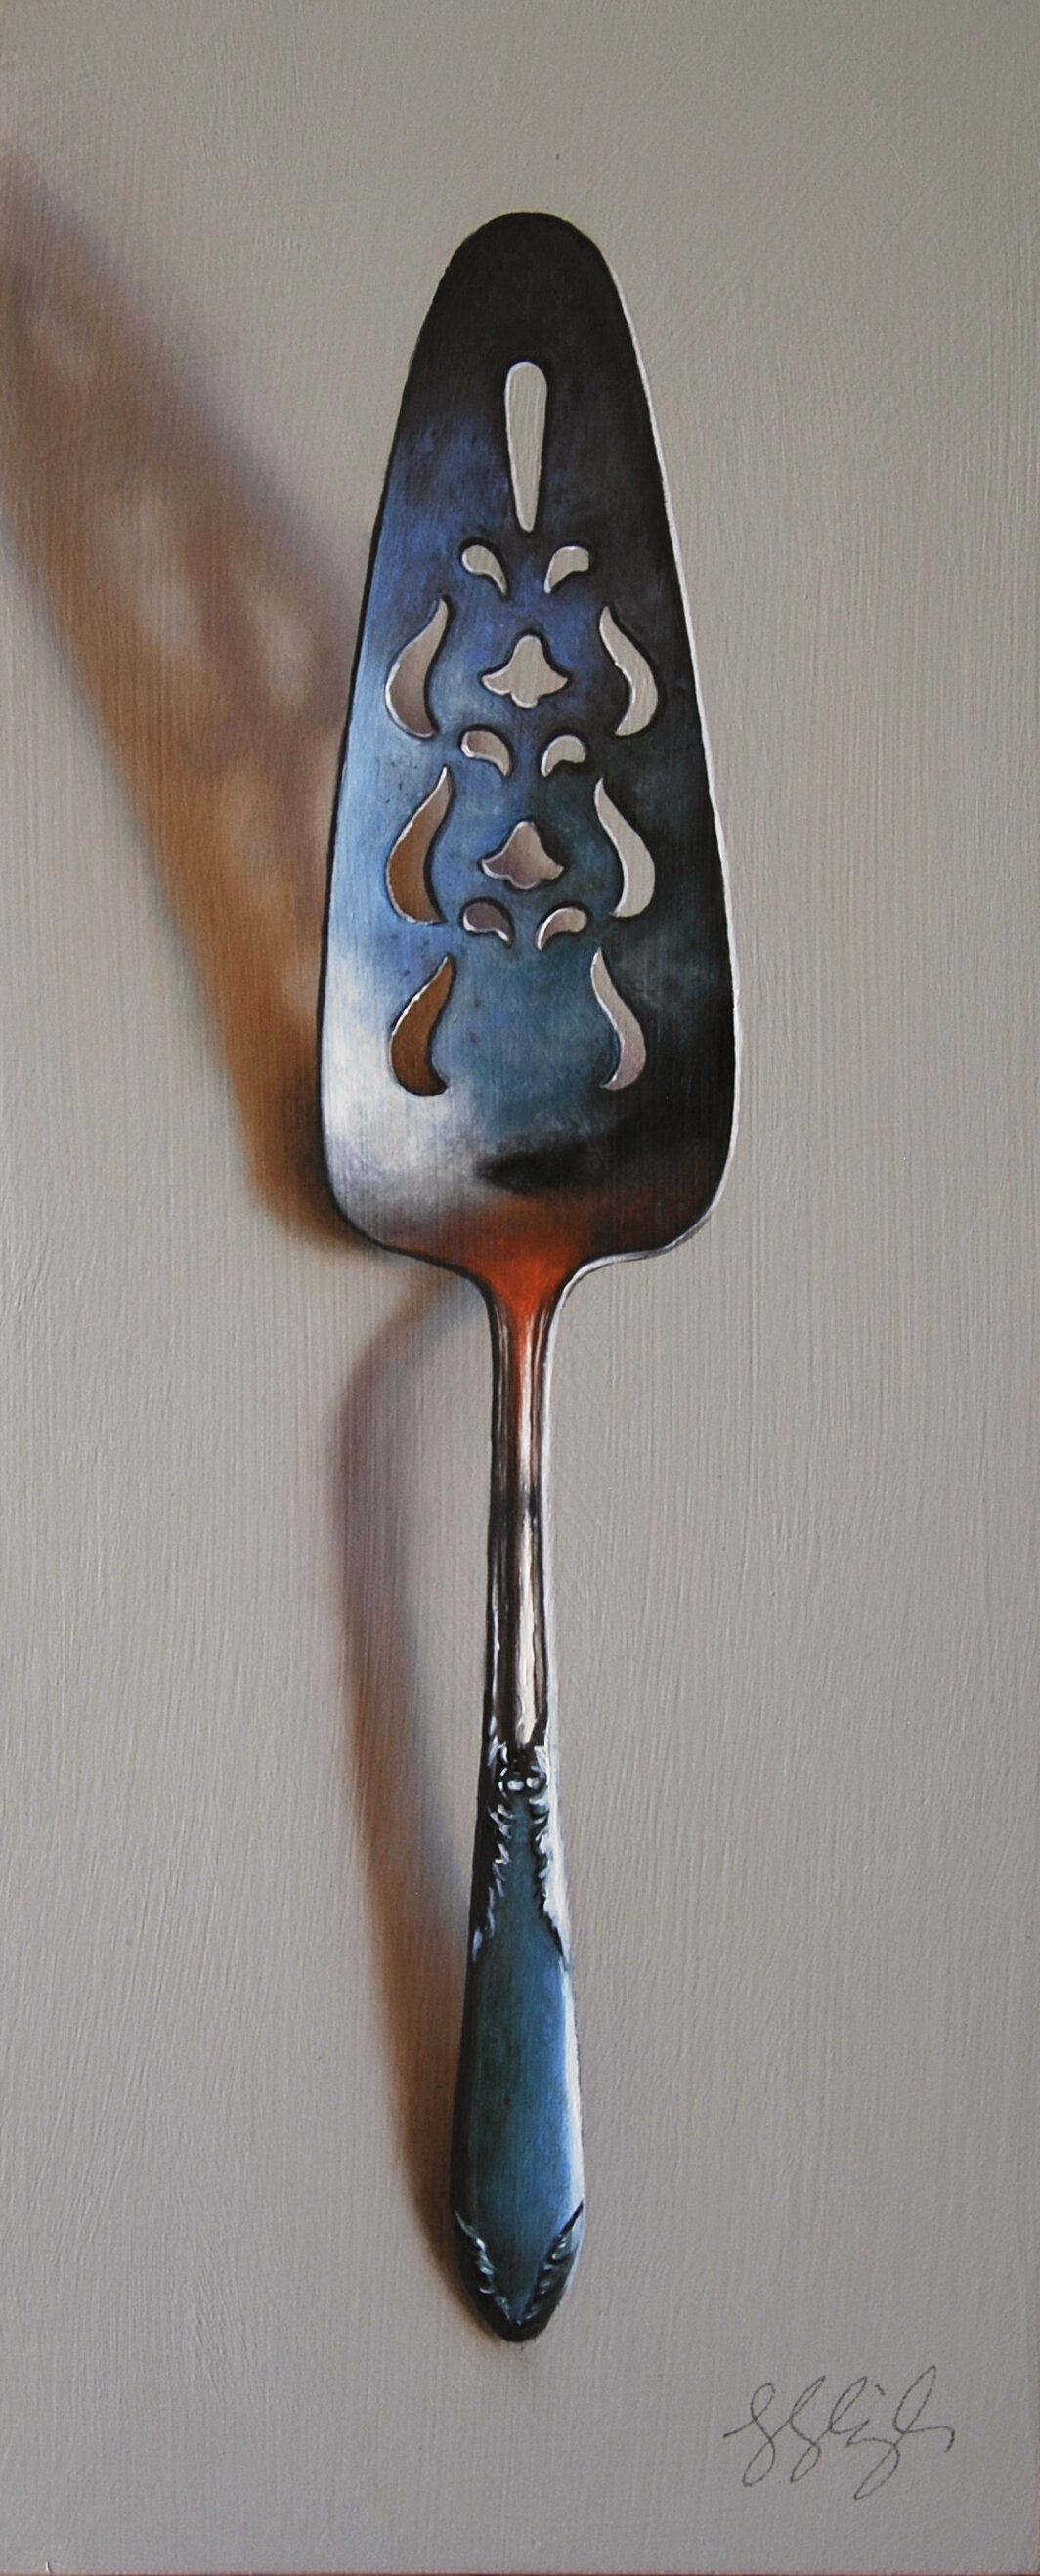   Silver Server #26, The Painter  Oil on panel, 2021. 12x5” 